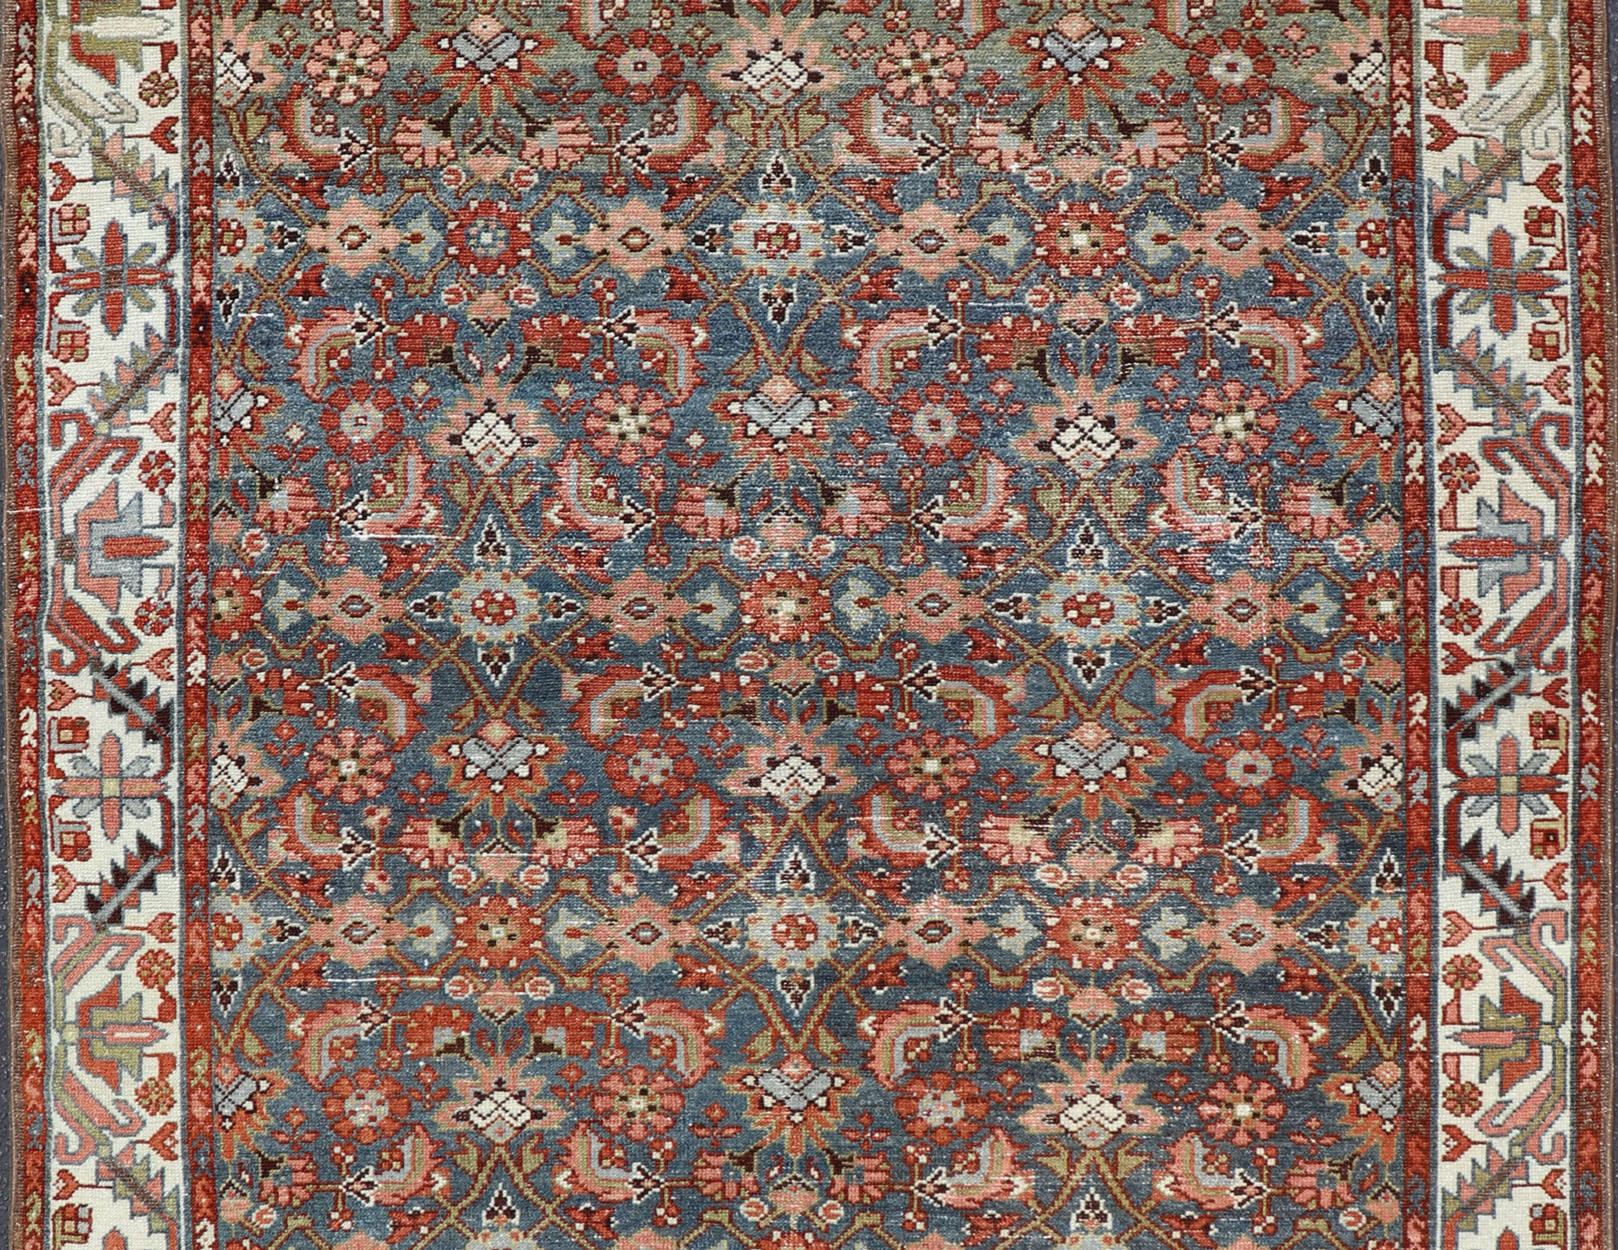 Hand-Knotted Antique Persian Malayer with All-Over Design in Red, Olive, and Blue